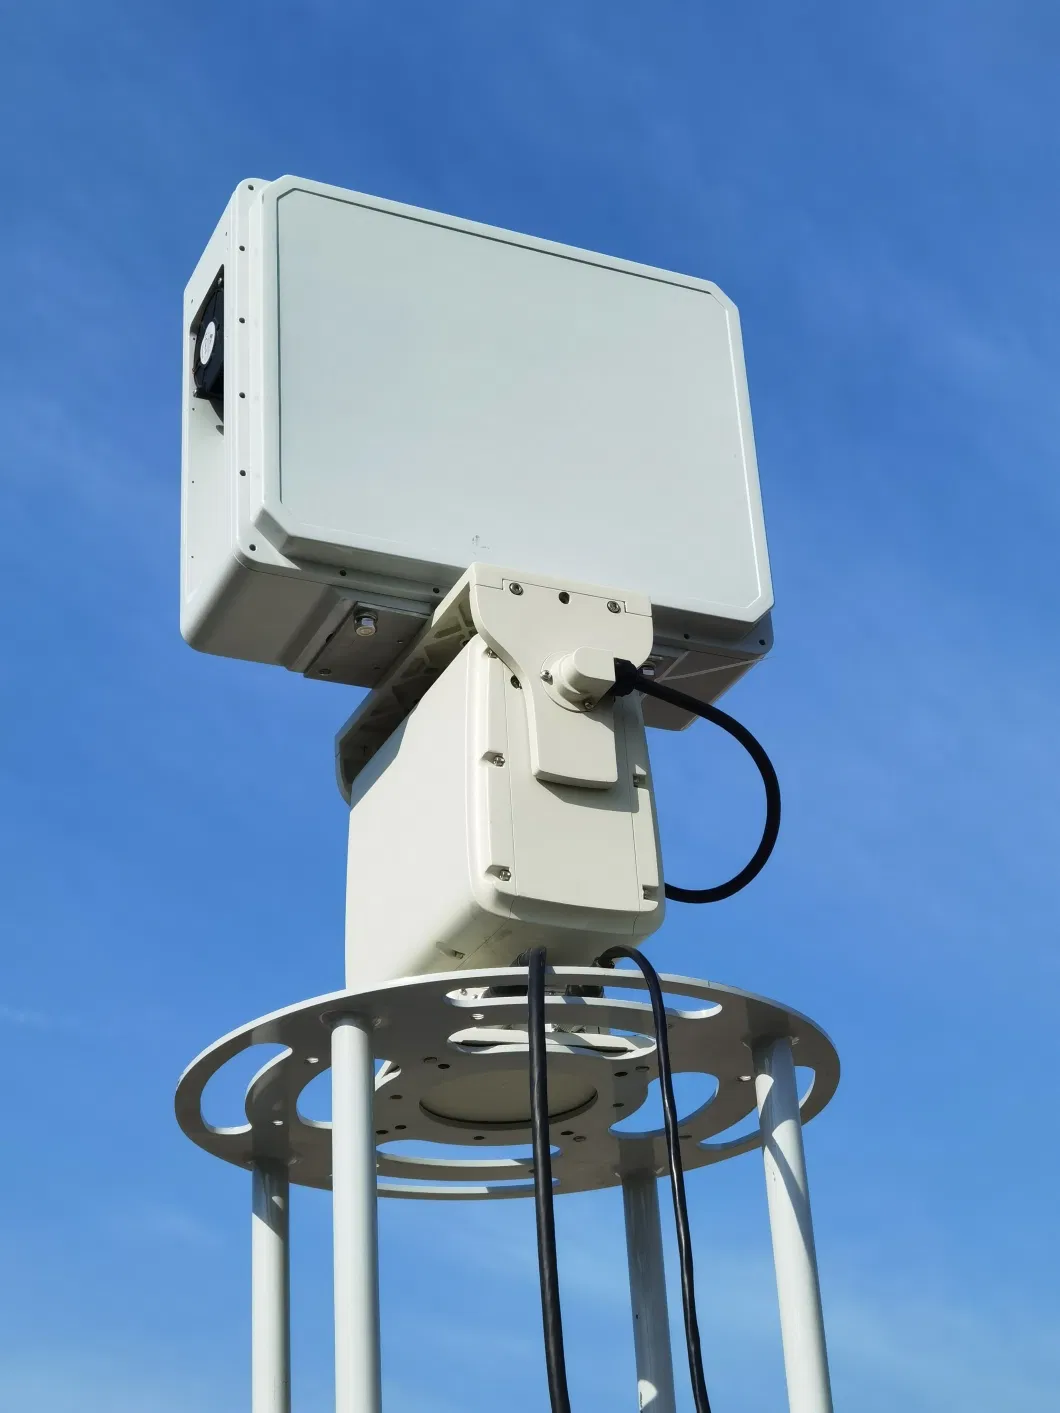 X Band Radar Based Security with Better Perimeter Detection Capabilities for Prisons